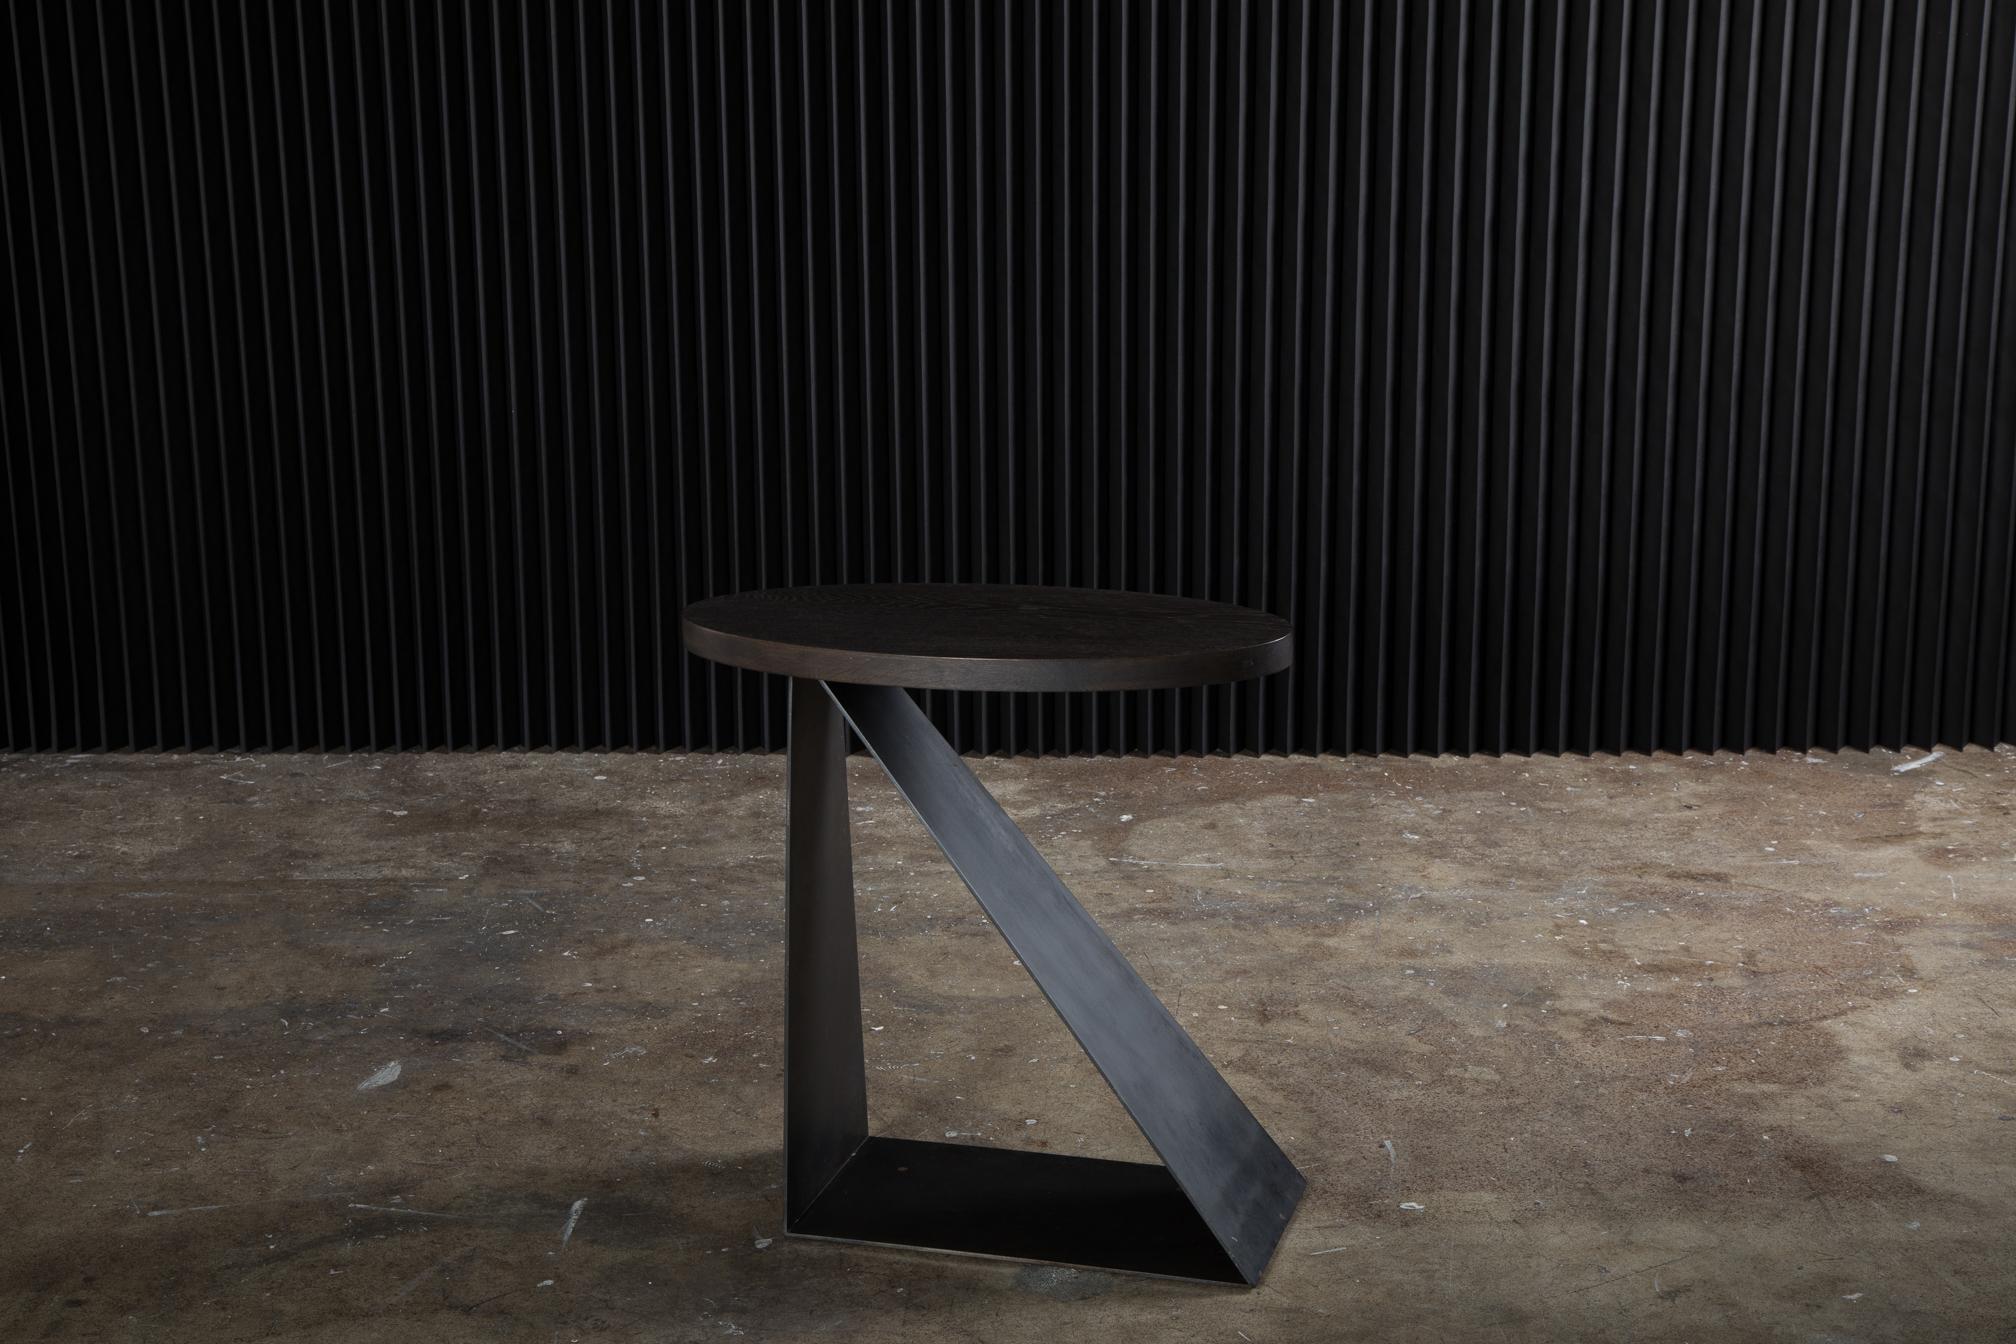 Form and function. The Haider side table takes cues from Haider Ackerman's designs—sharp edges made possible by darts and unexpected seaming, an edginess that is emulated in the base of this piece. Harsh lines and clean edges offer a beautiful